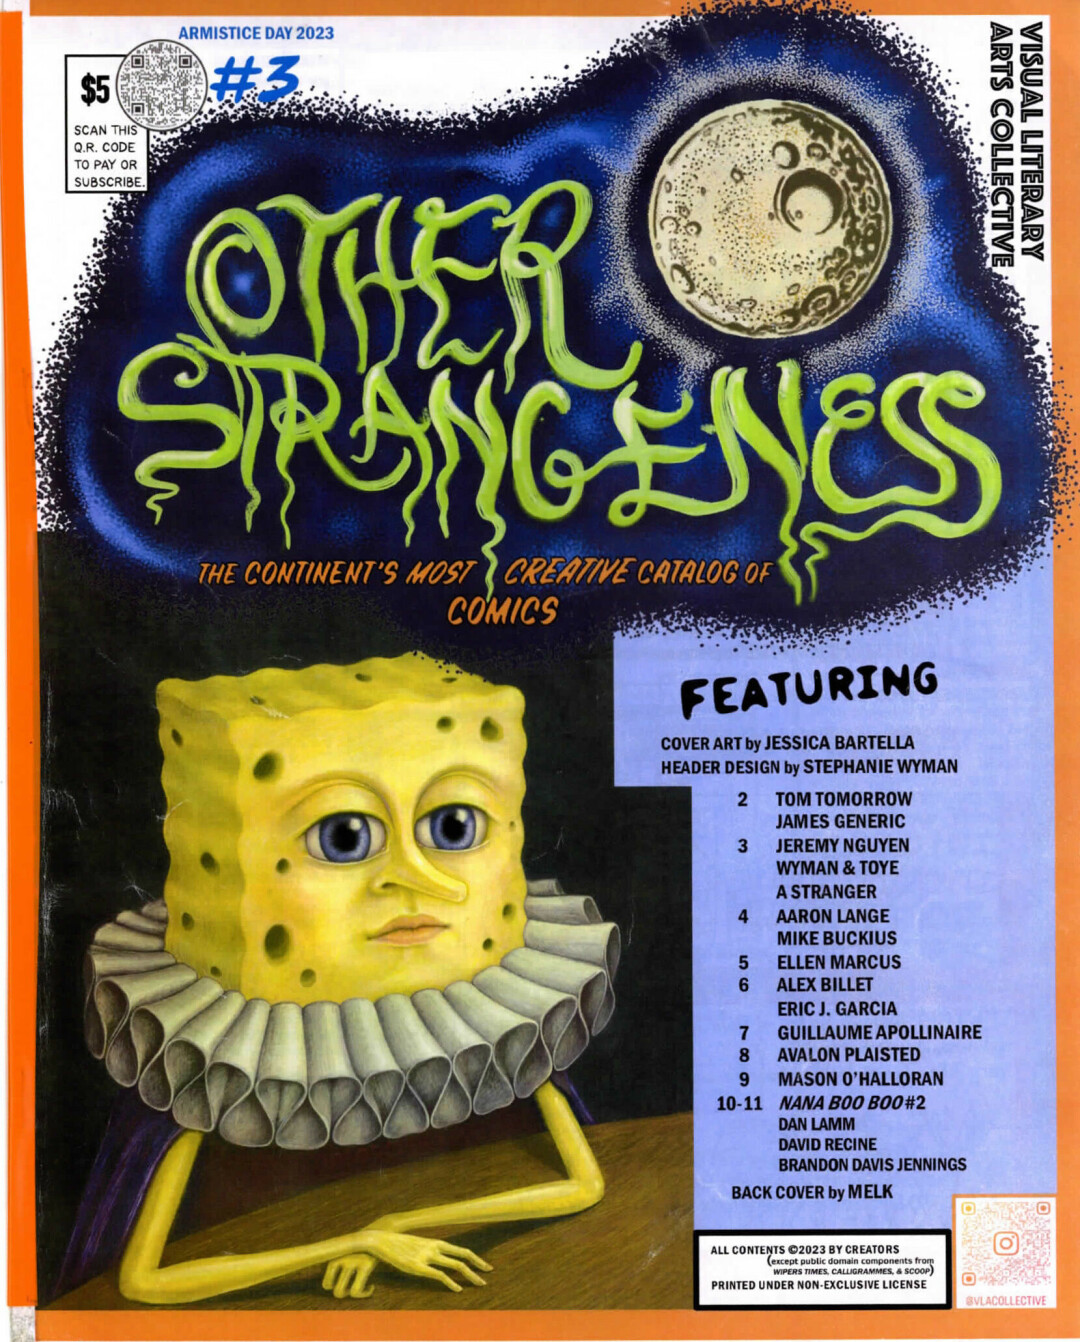 HOW STRANGE. The VLA Collective, a locally started group of artists, have released four issues of their zine, Other Strangeness. (Pictured is zine #3